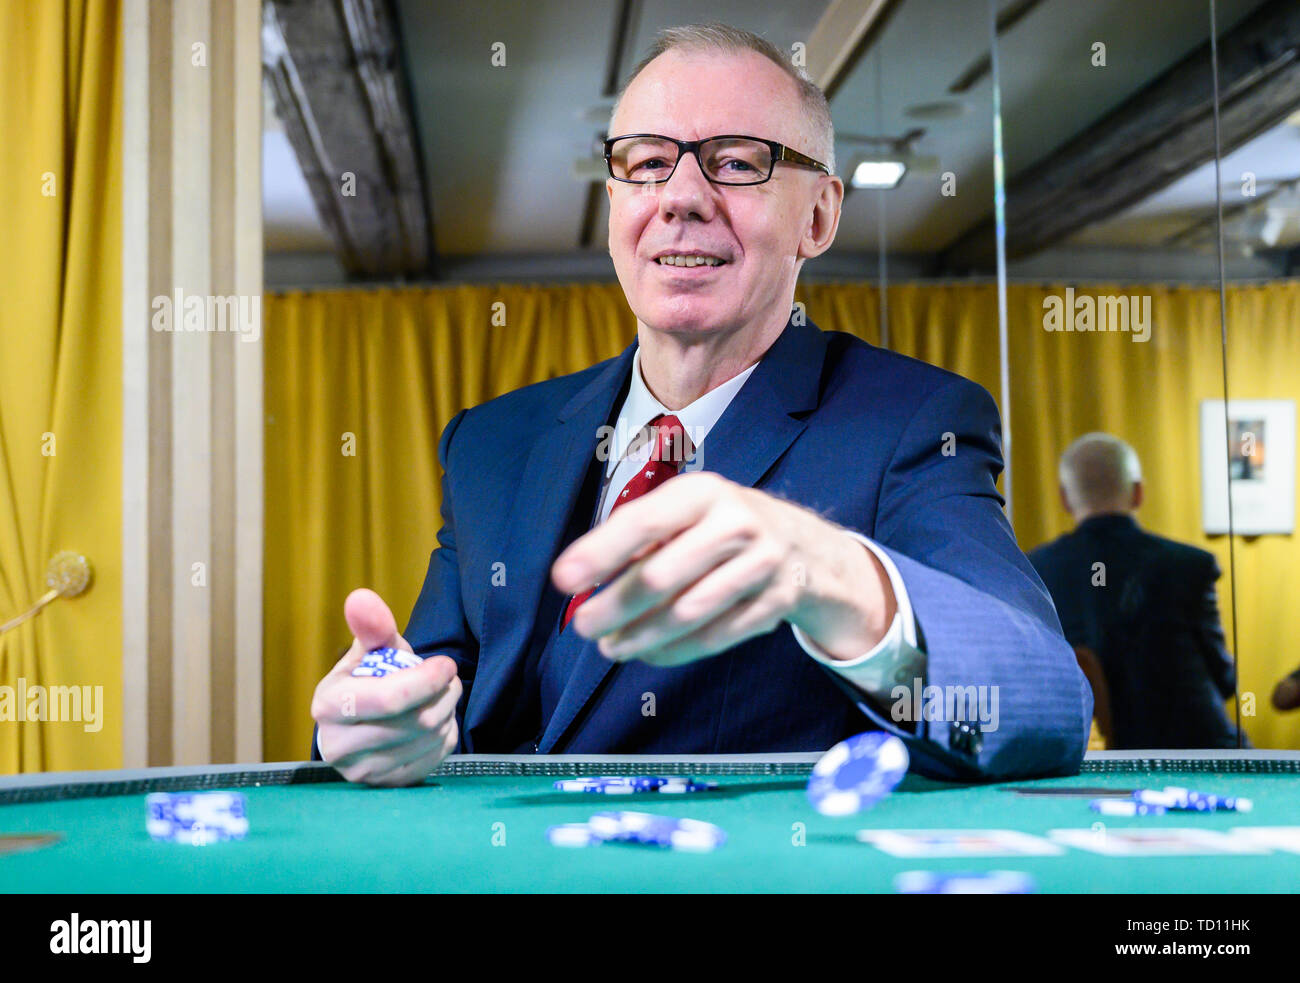 Hameln, Germany. 11th June, 2019. Ludger Pistor, actor in the James Bond film 'Casino Royale' (2006) as Swiss private banker 'Herr Mendel', sits in the exhibition 'James Bond. The power of seduction' in the Museum Hameln at a casino table. The exhibition will run from 12 June 2019 to 10 May 2020. Credit: Christophe Gateau/dpa/Alamy Live News Stock Photo